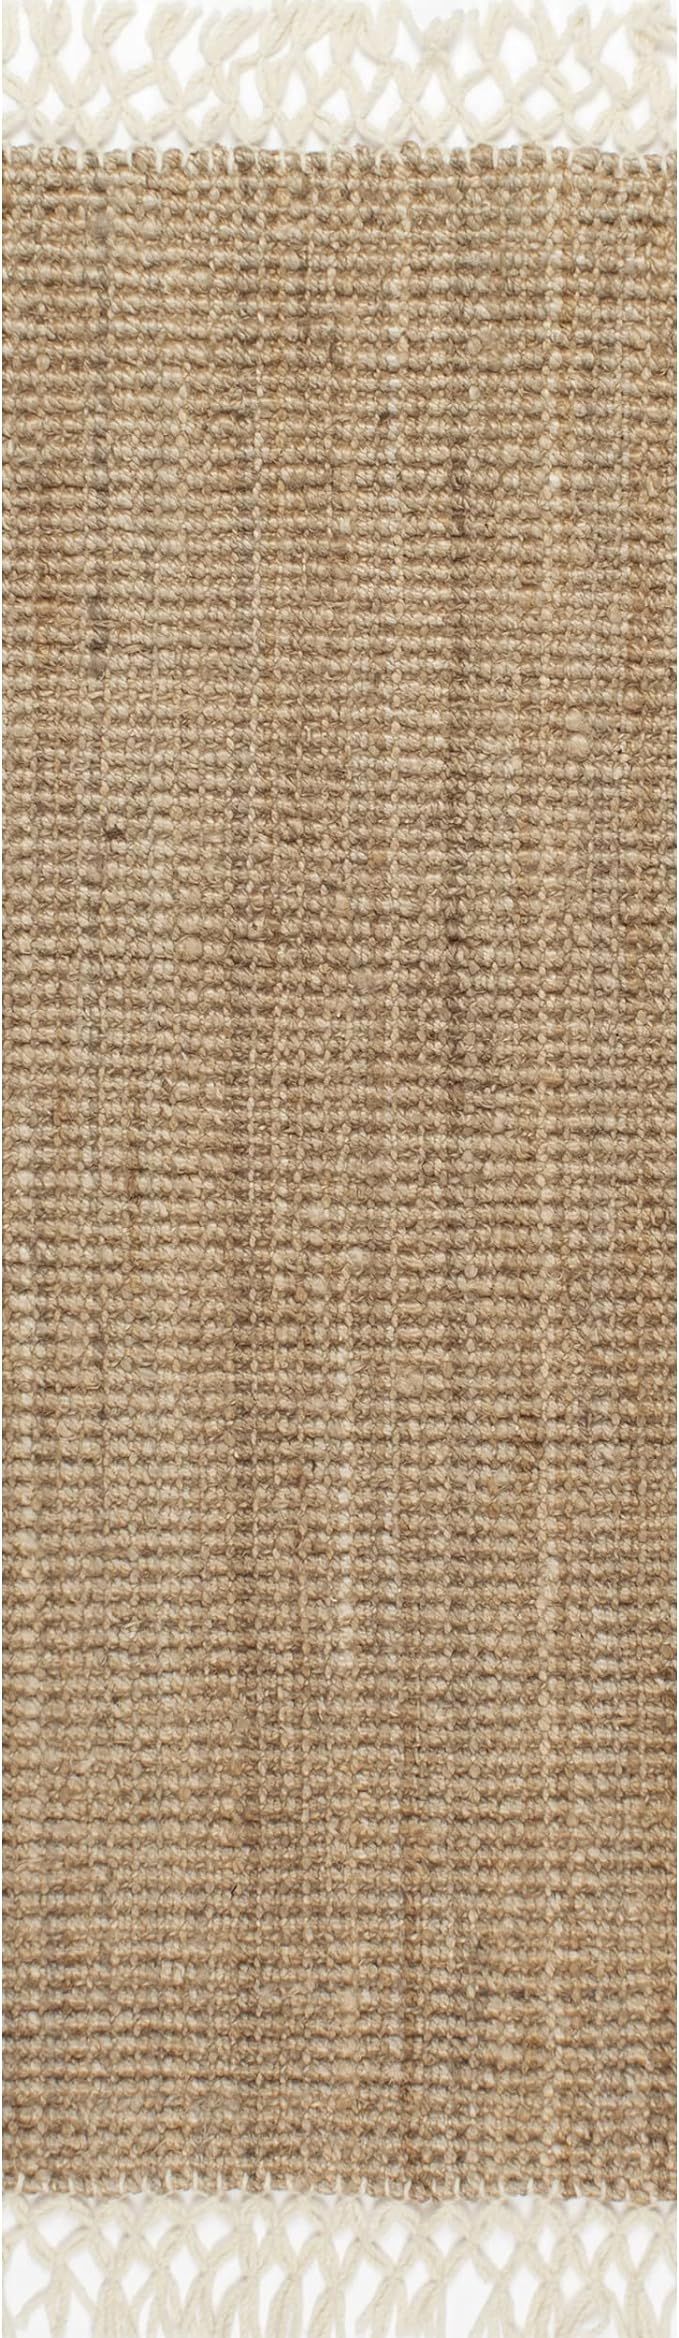 nuLOOM Raleigh Hand Woven Wool Runner Rug, 2' 6" x 6', Natural | Amazon (US)